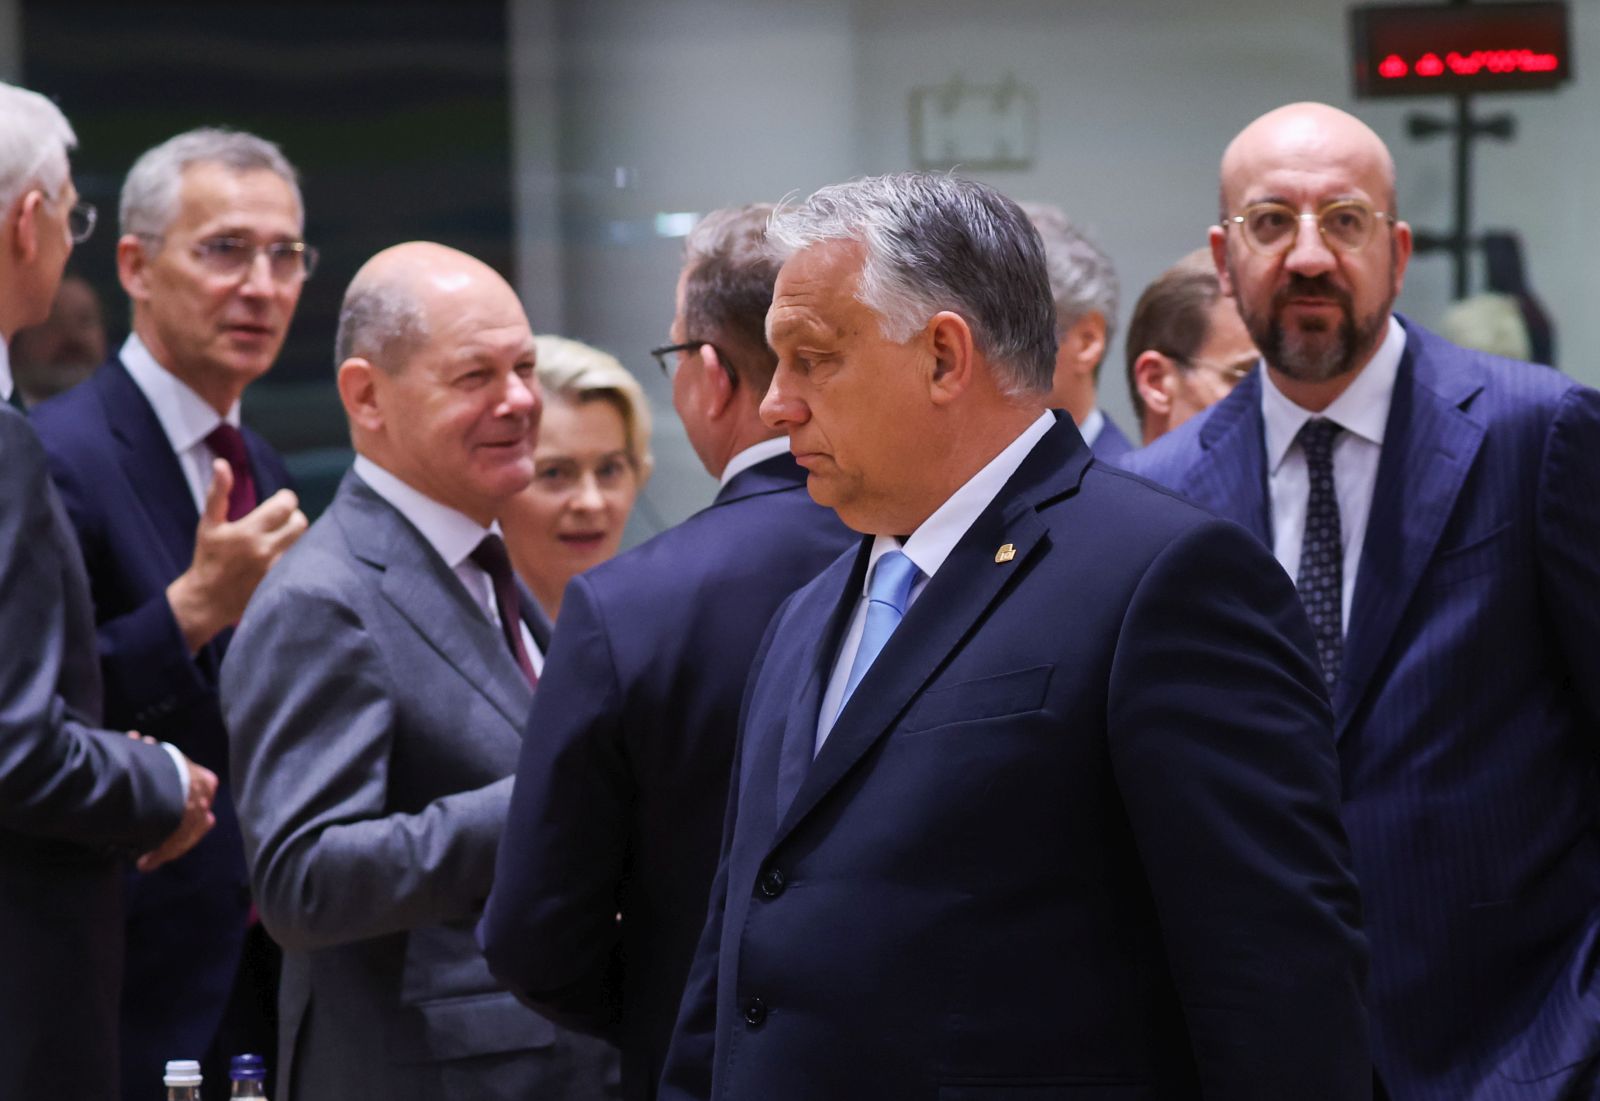 epa10717281 Hungarian Prime Minister Viktor Orban is passing in front of Nato Secretary General Jens Stoltenberg , German Federal Chancellor Olaf Scholz, European Council President Charles Michel during a European Council in Brussels, Belgium, 29 June 2023. EU leaders are gathering in Brussels for a two-day summit to discuss the latest developments in relation to Russia's invasion of Ukraine and continued EU support for Ukraine as well as the block's economy, security, migration and external relations, among other topics.  EPA/OLIVIER HOSLET